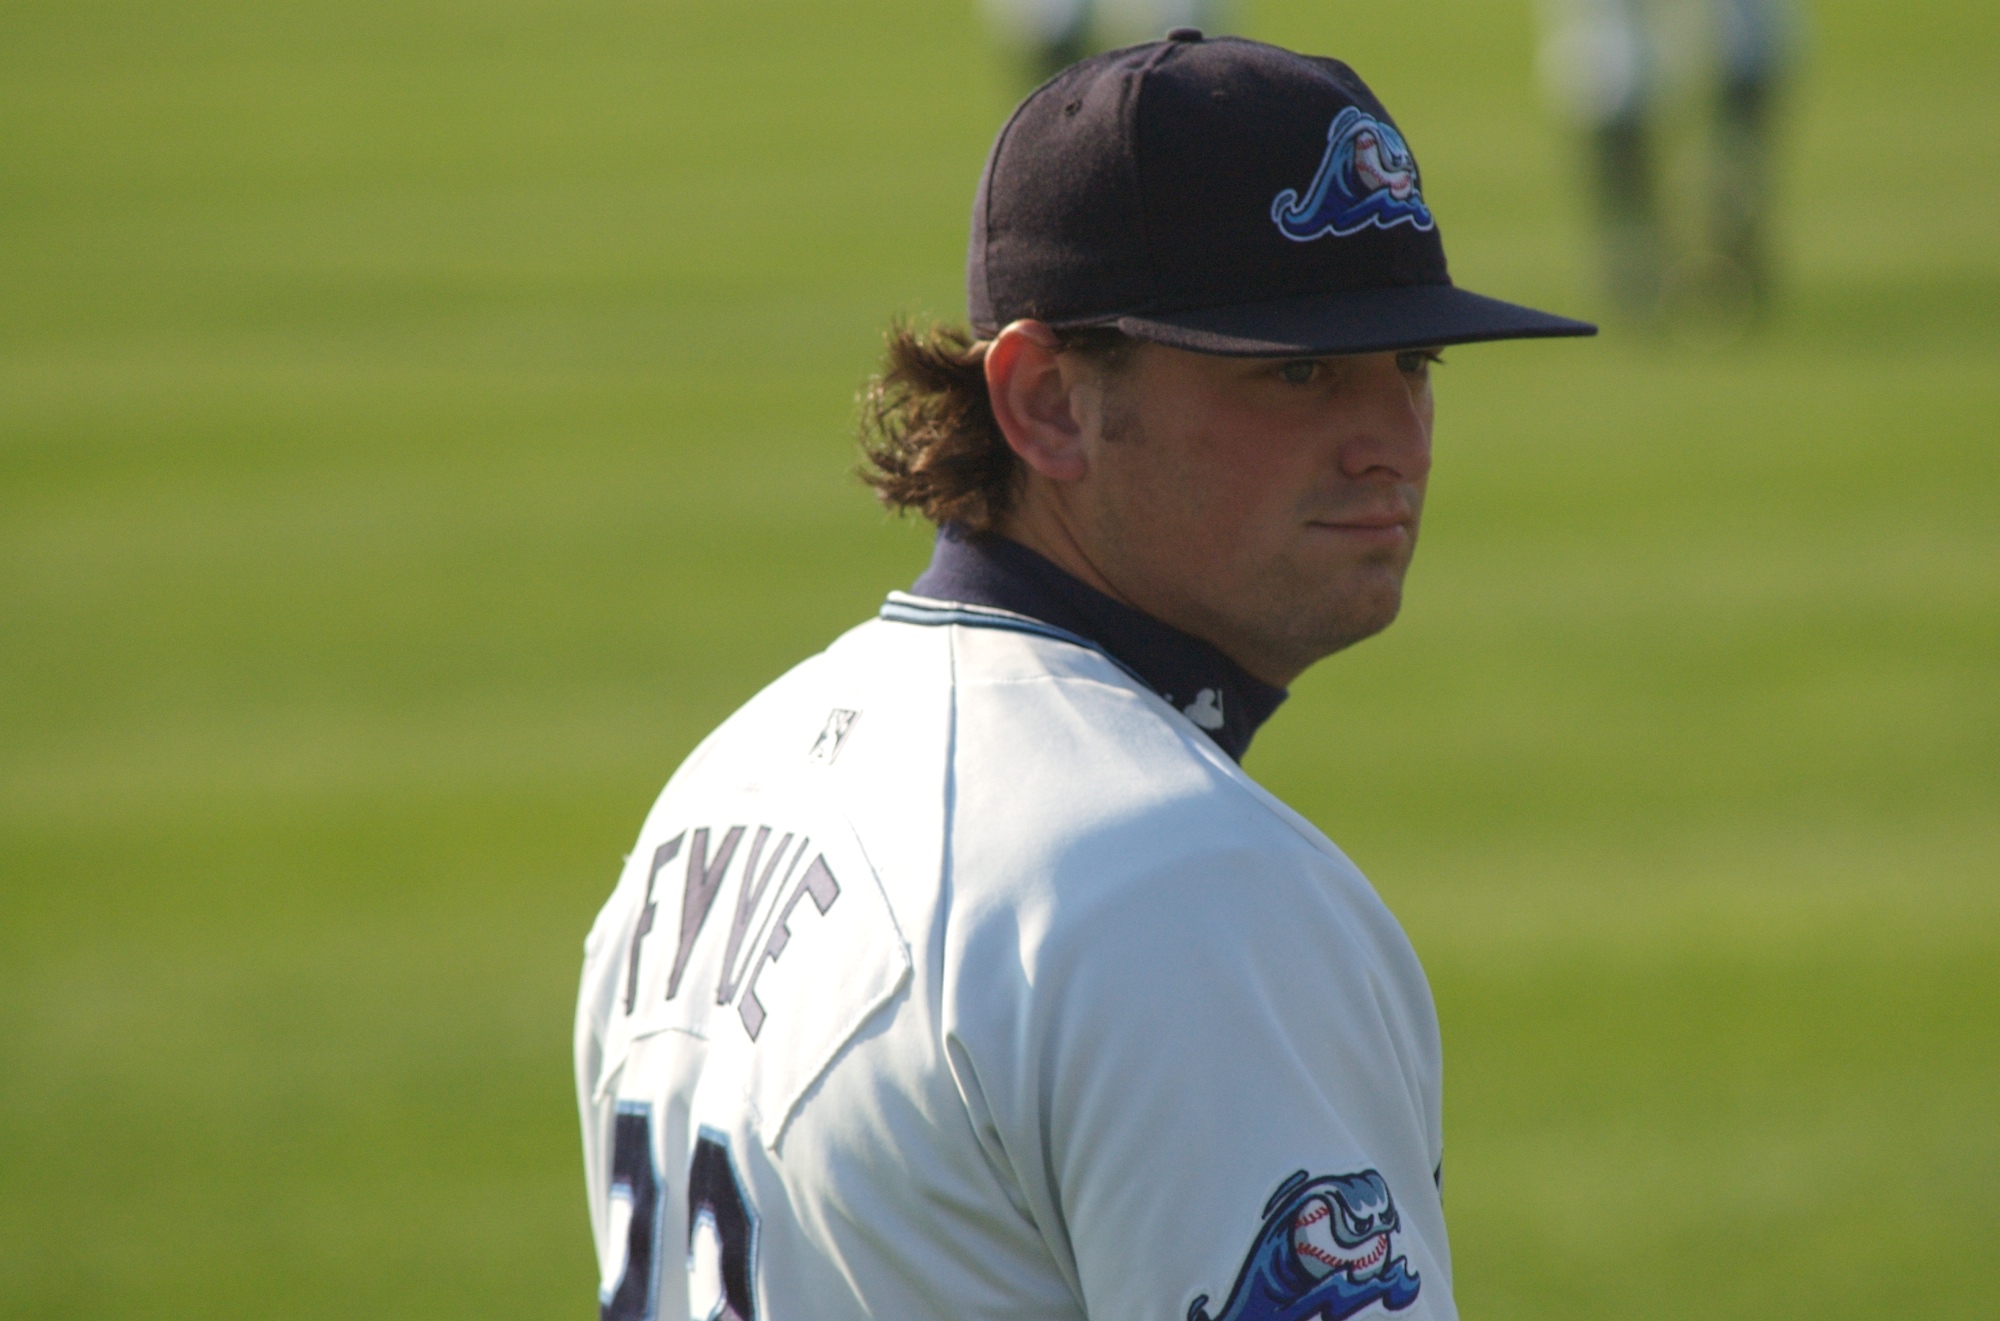 a baseball player wearing a hat and a jersey